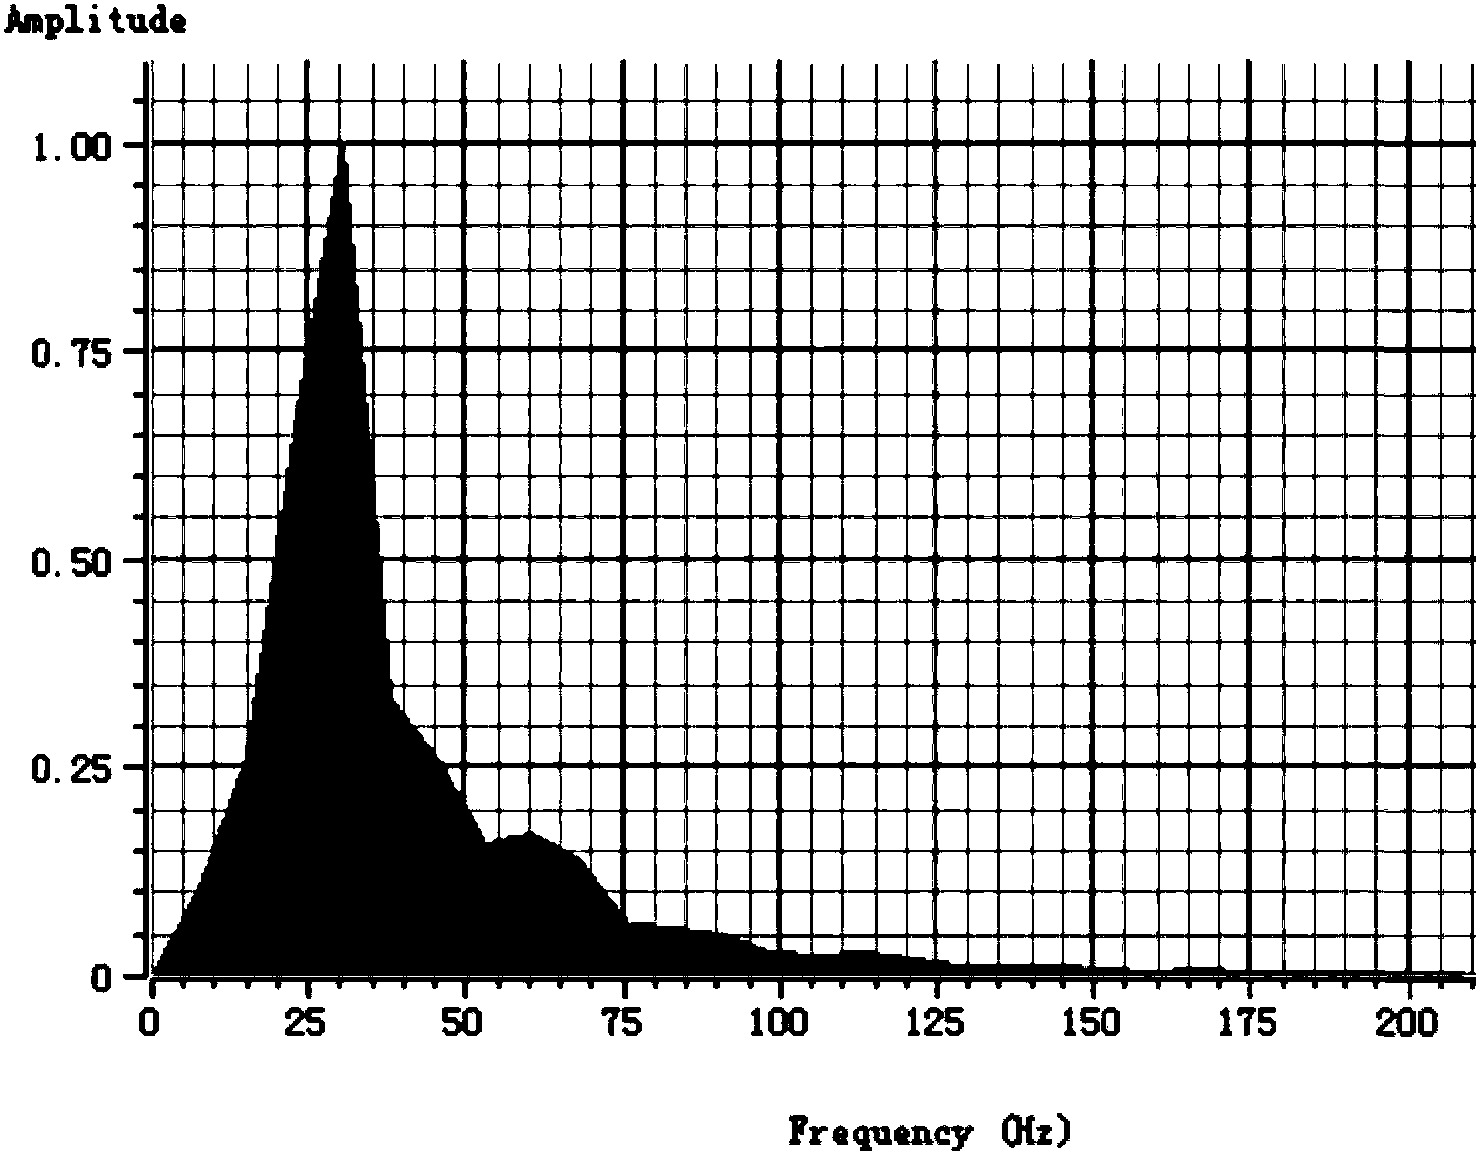 Coal bed gas prediction method based on frequency attenuation